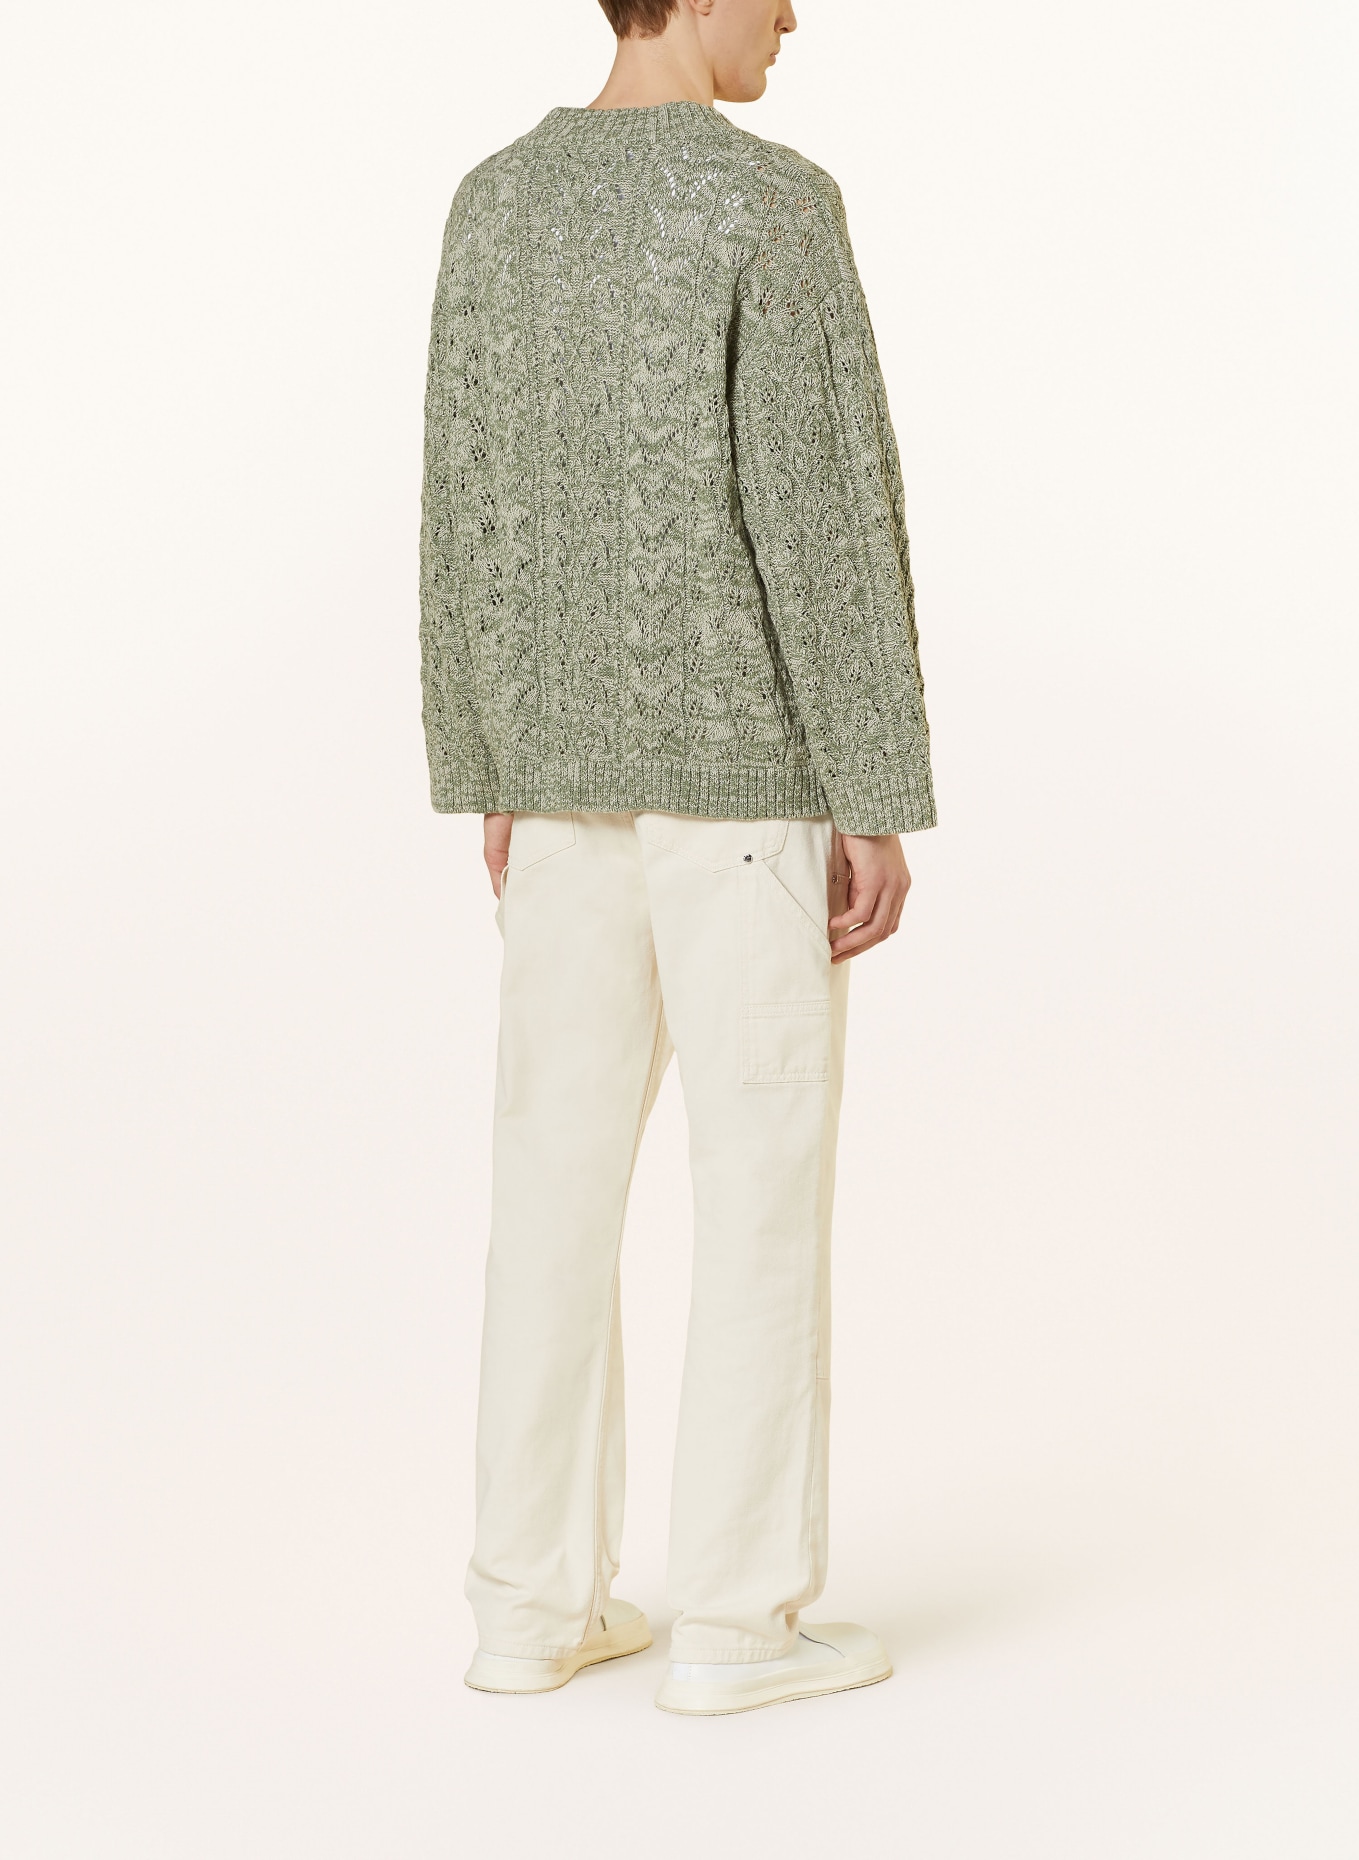 HOLZWEILER Sweater PALOMA, Color: GREEN/ LIGHT GRAY (Image 3)